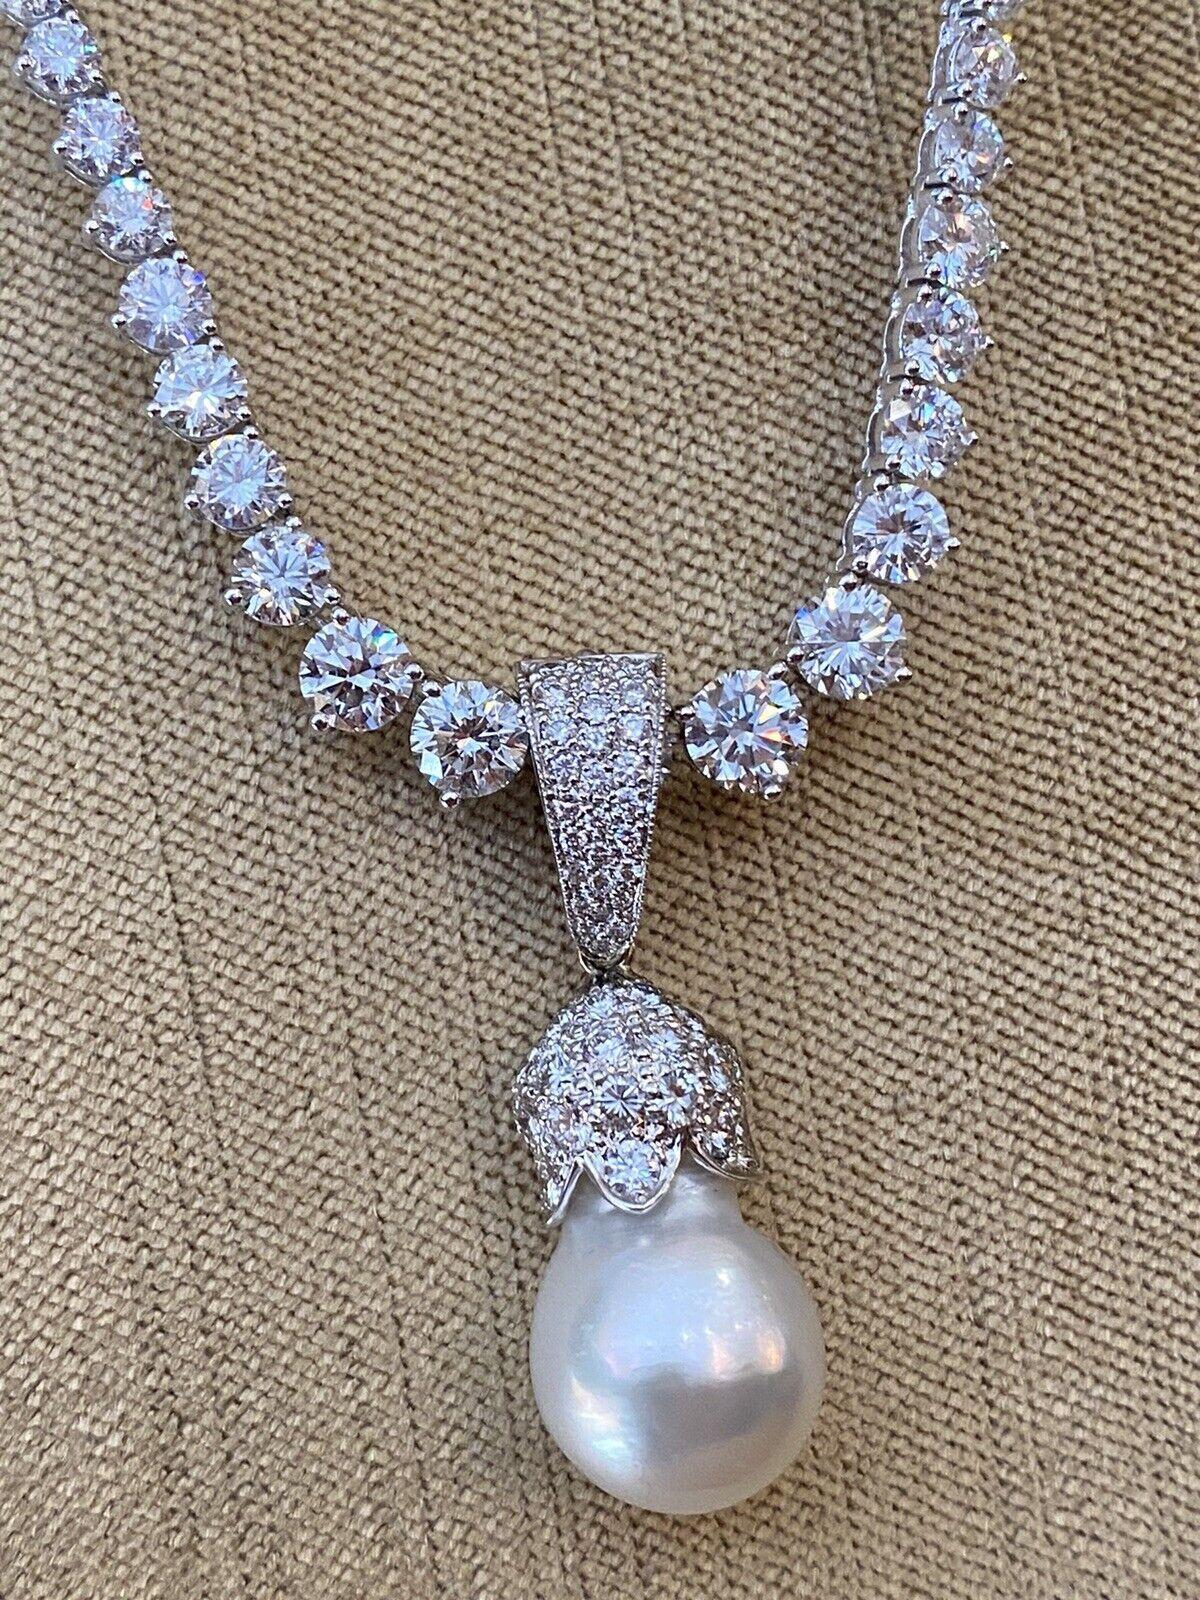 Estate Pearl & Diamond Pendant in 18k White Gold

Estate Pearl & Diamond Pendant features a 14.4mm white Baroque Pearl with a light pink overtone and high luster set in a tulip flower shaped pavè diamond cap attached to large diamond bail, all set